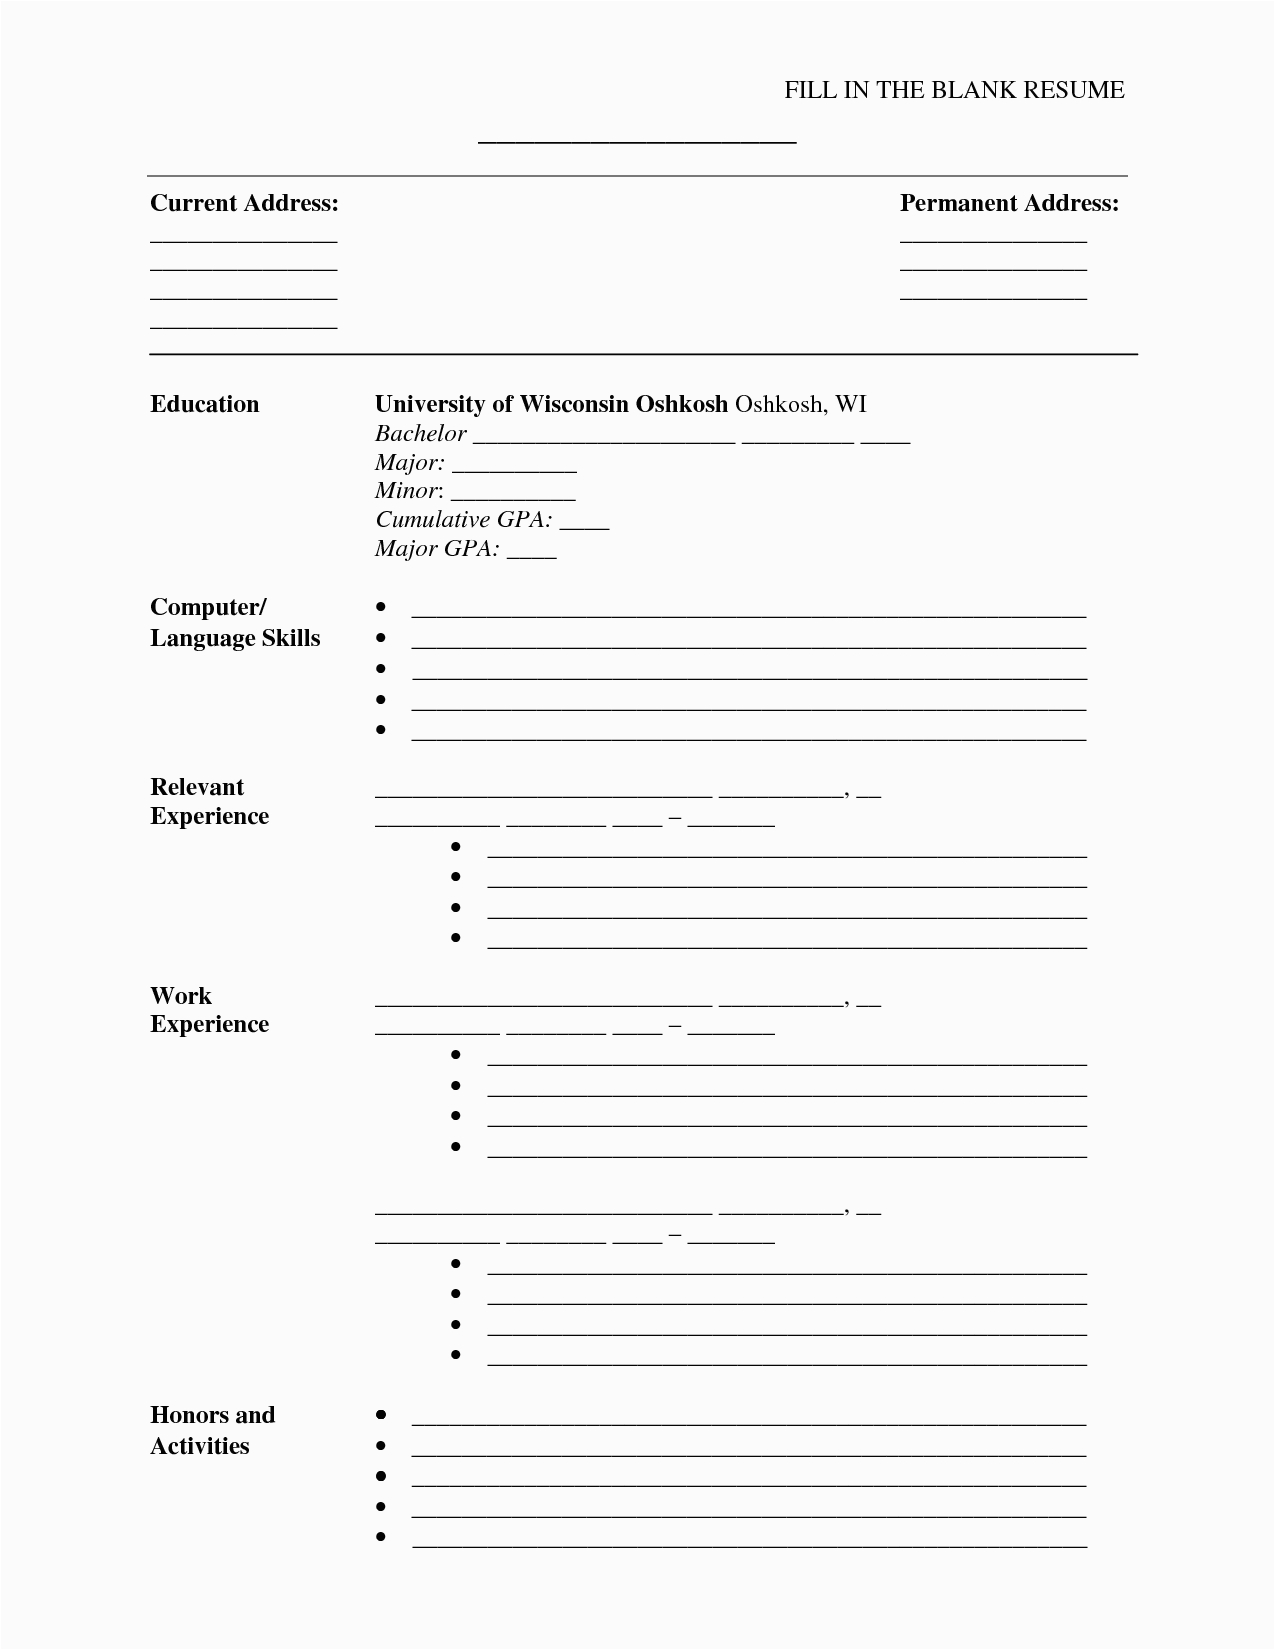 Blank Resume Templates for Free to Fill In Fill In the Blank Resume Pdf Umecareer